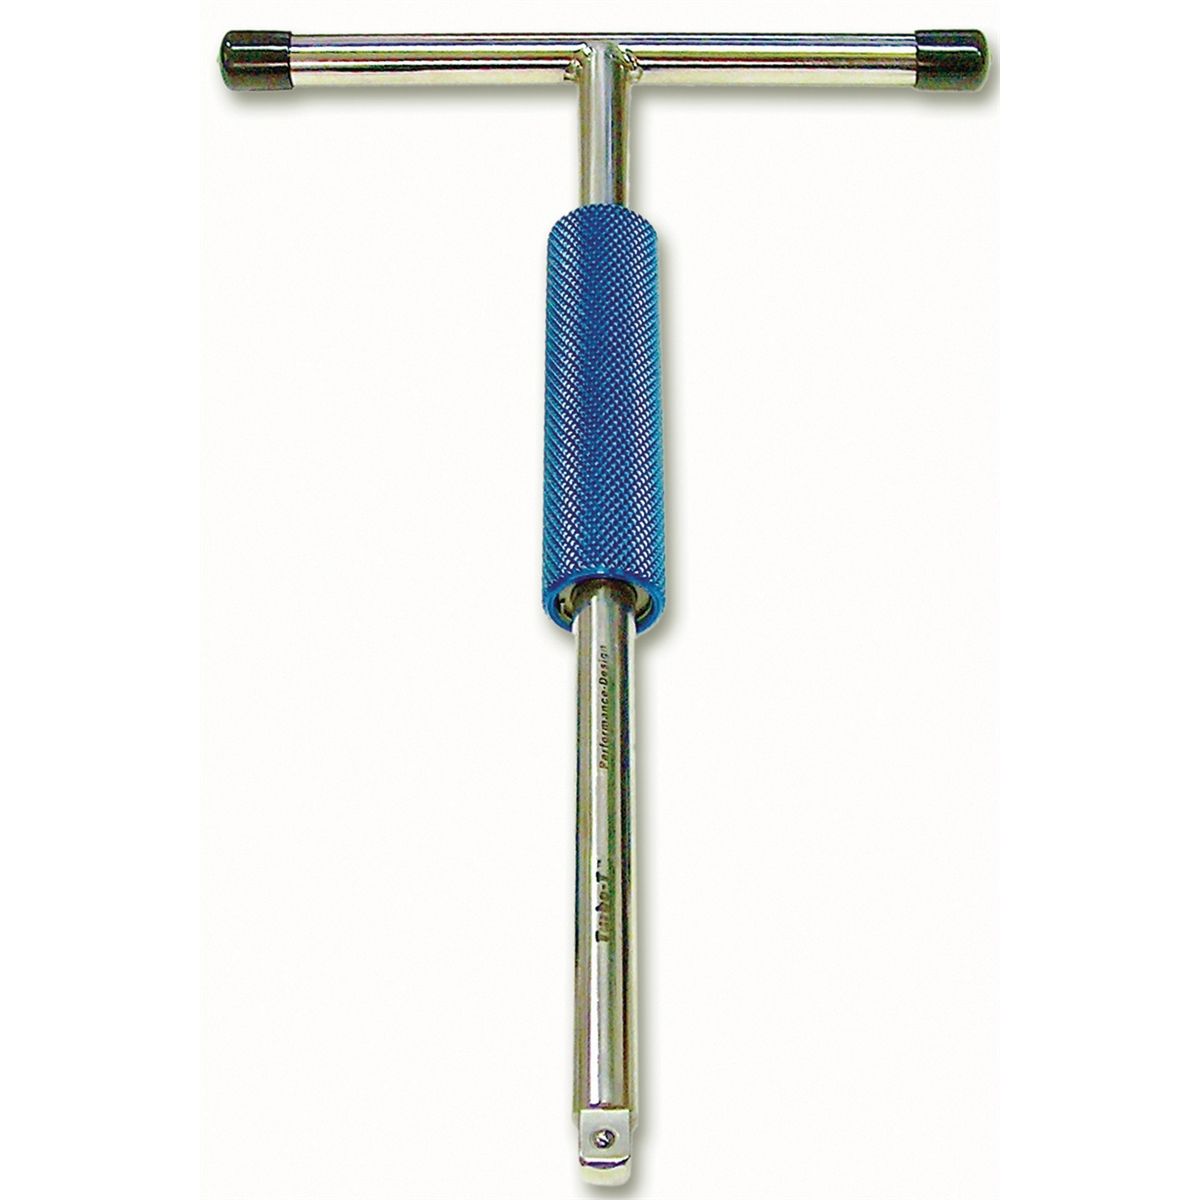 Turbo-T 3/8" Drive Speed "T" Handle Wrench